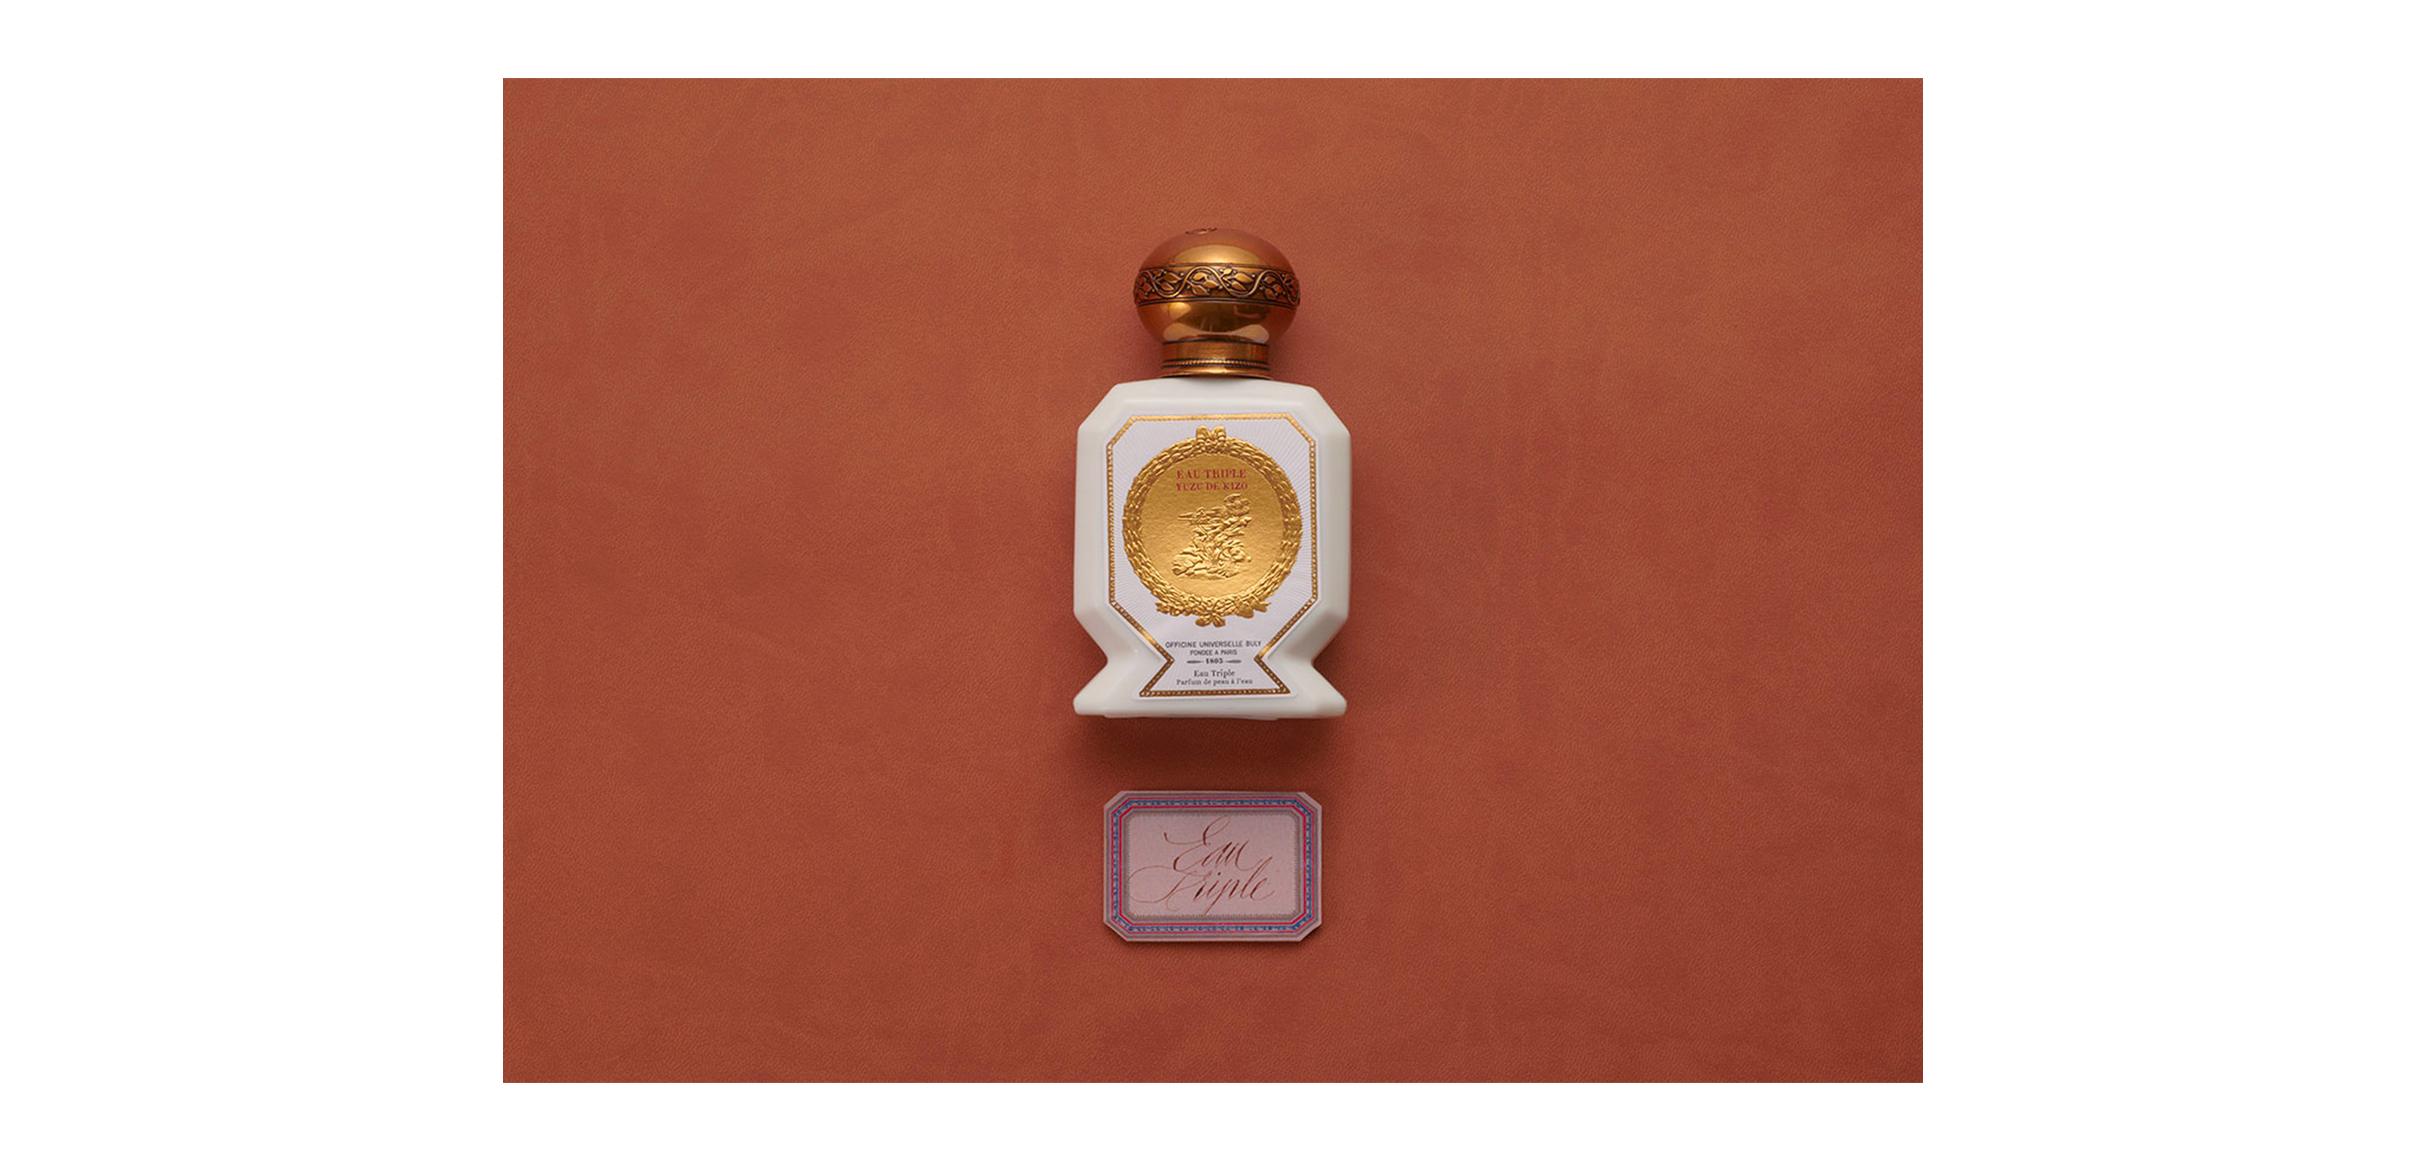 L'Officine Universelle Buly, the elegance of water-based perfumes -  Anthoscents